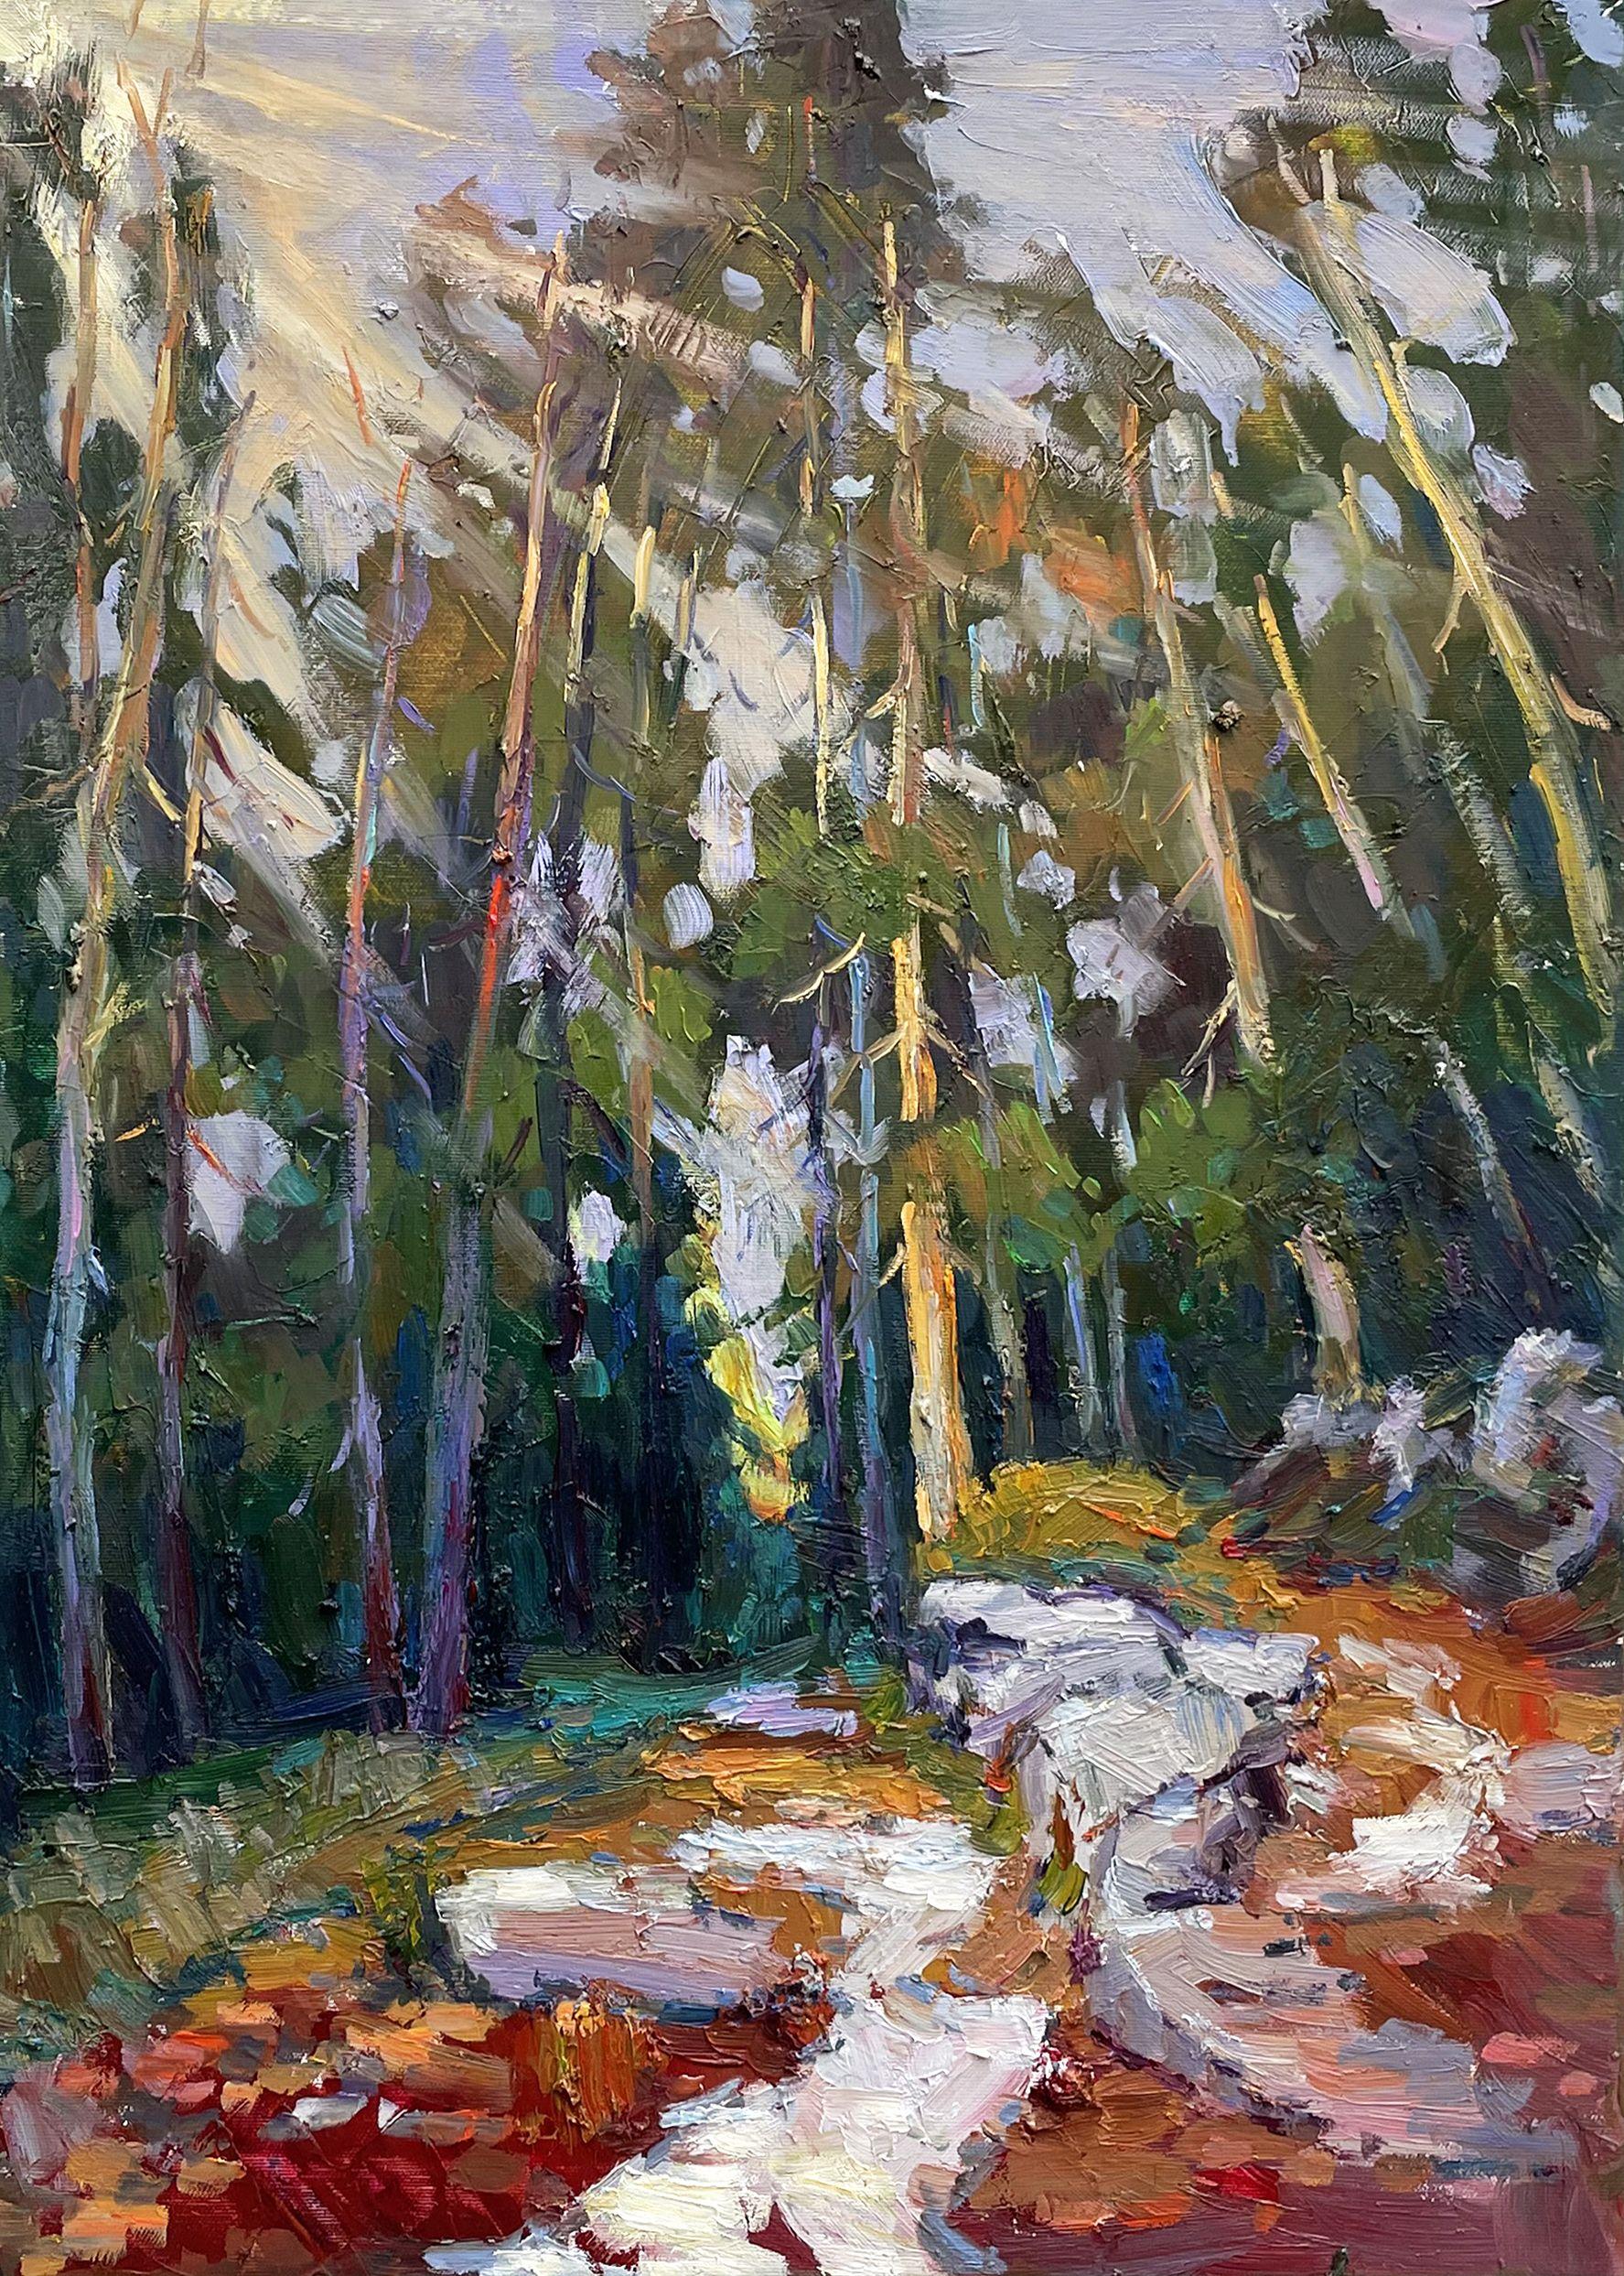 Original Oil painting by Ukrainian artist Evgeny Chernyakovsky "Forest " 50.0 X 70.0 CM / 19.6 X 27.5 IN HIGH QUALITY oil on canvas Signed on the front and back Dated 2022 Good condition GUARANTEE OF AUTHENTICITY :: Painting :: Impressionist :: This